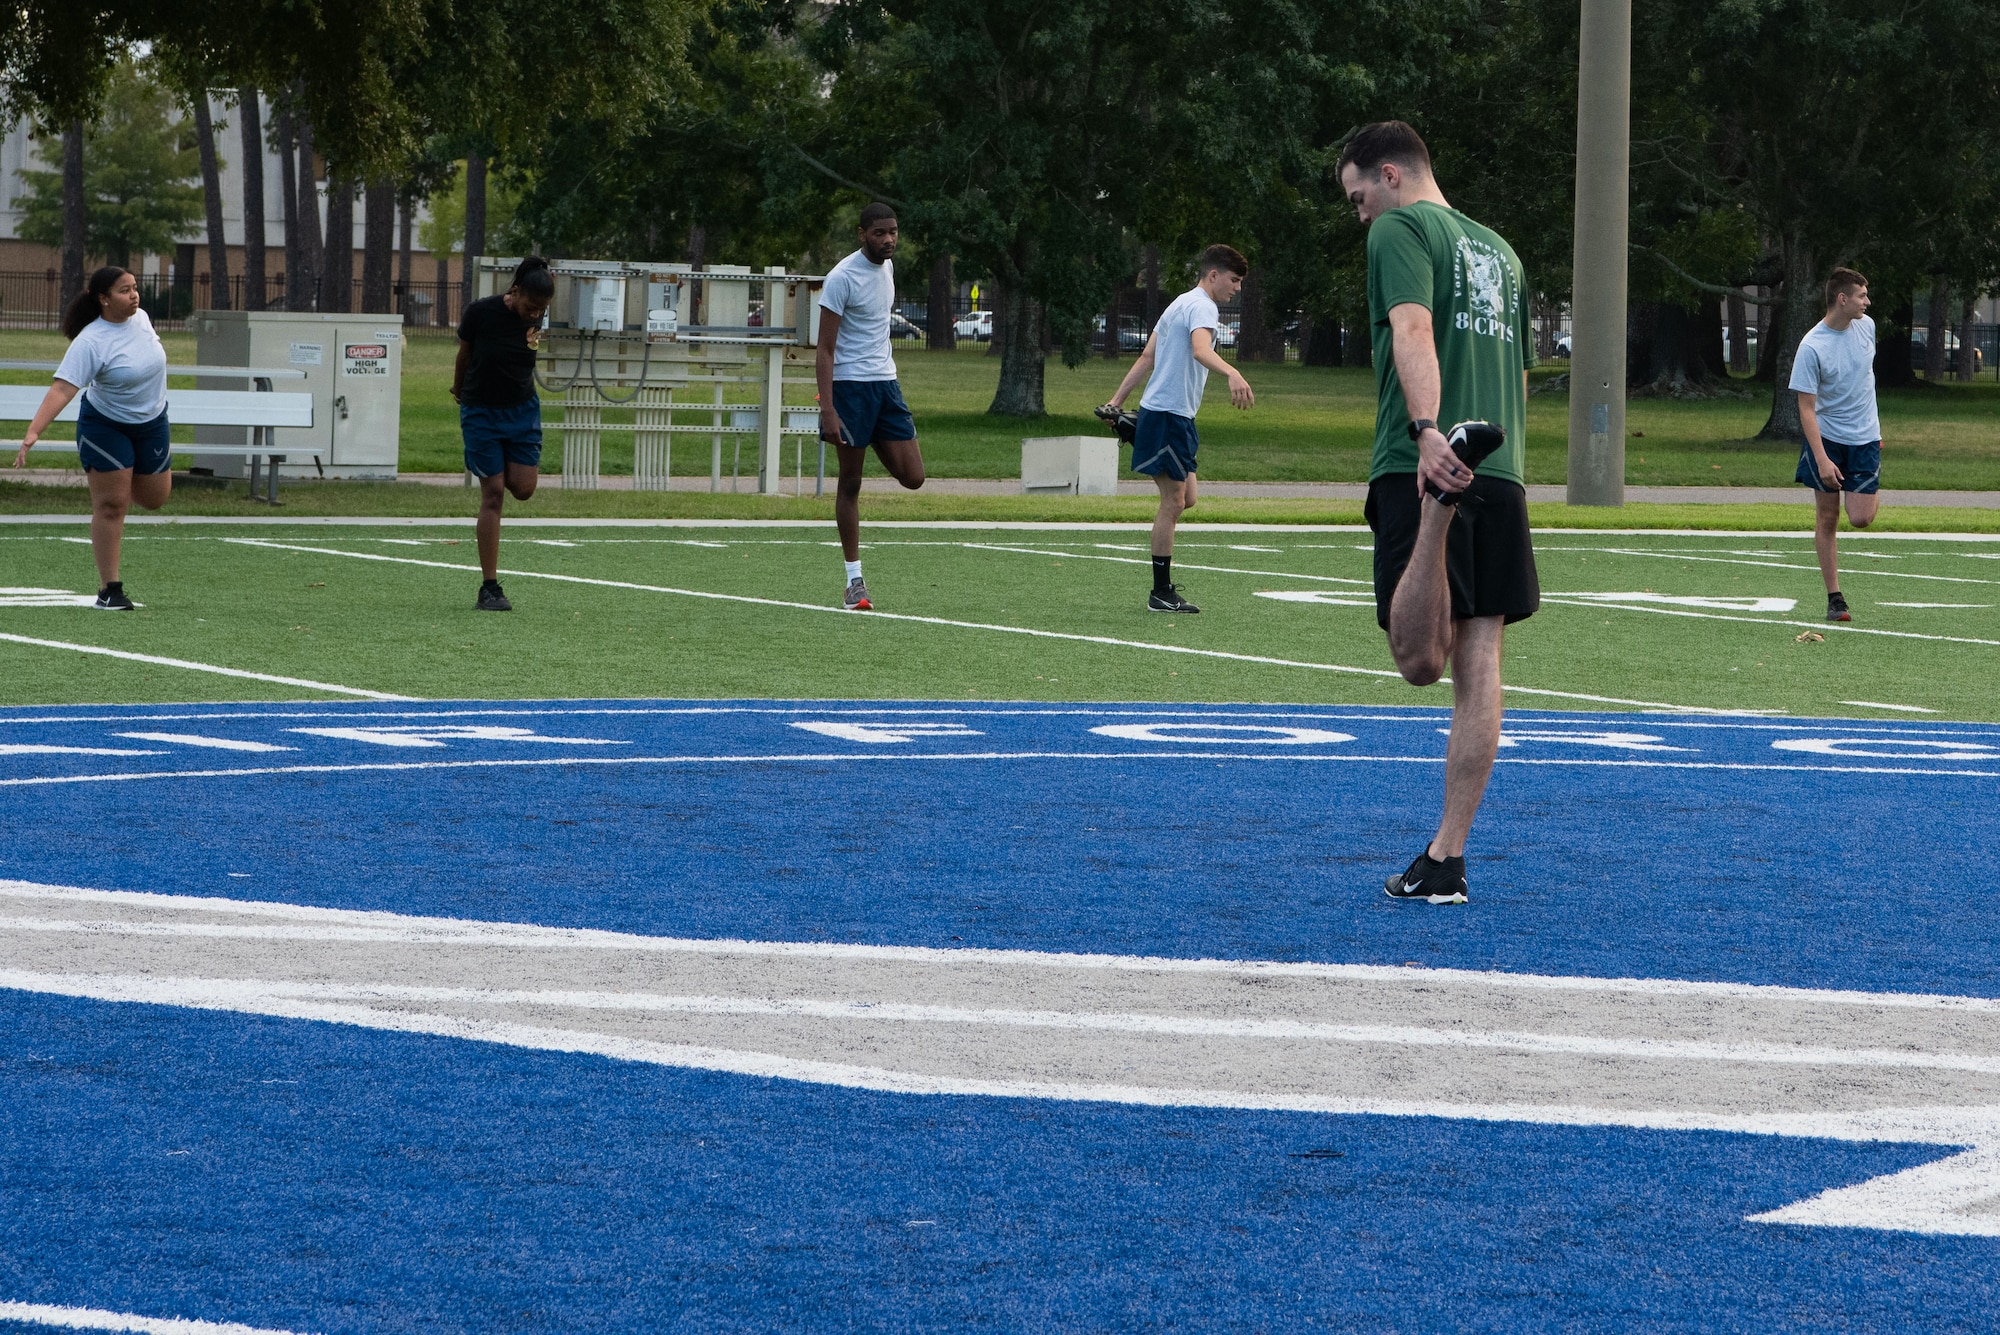 U.S. Air Force Staff Sgt. Cody Moss, 81st Comptroller Squadron unit deployment manager, leads members of the 81st CPTS and the 81st Communications Squadron through warm-ups on the Multi-Purpose Turf Field at Keesler Air Force Base, Mississippi, July 28, 2023.